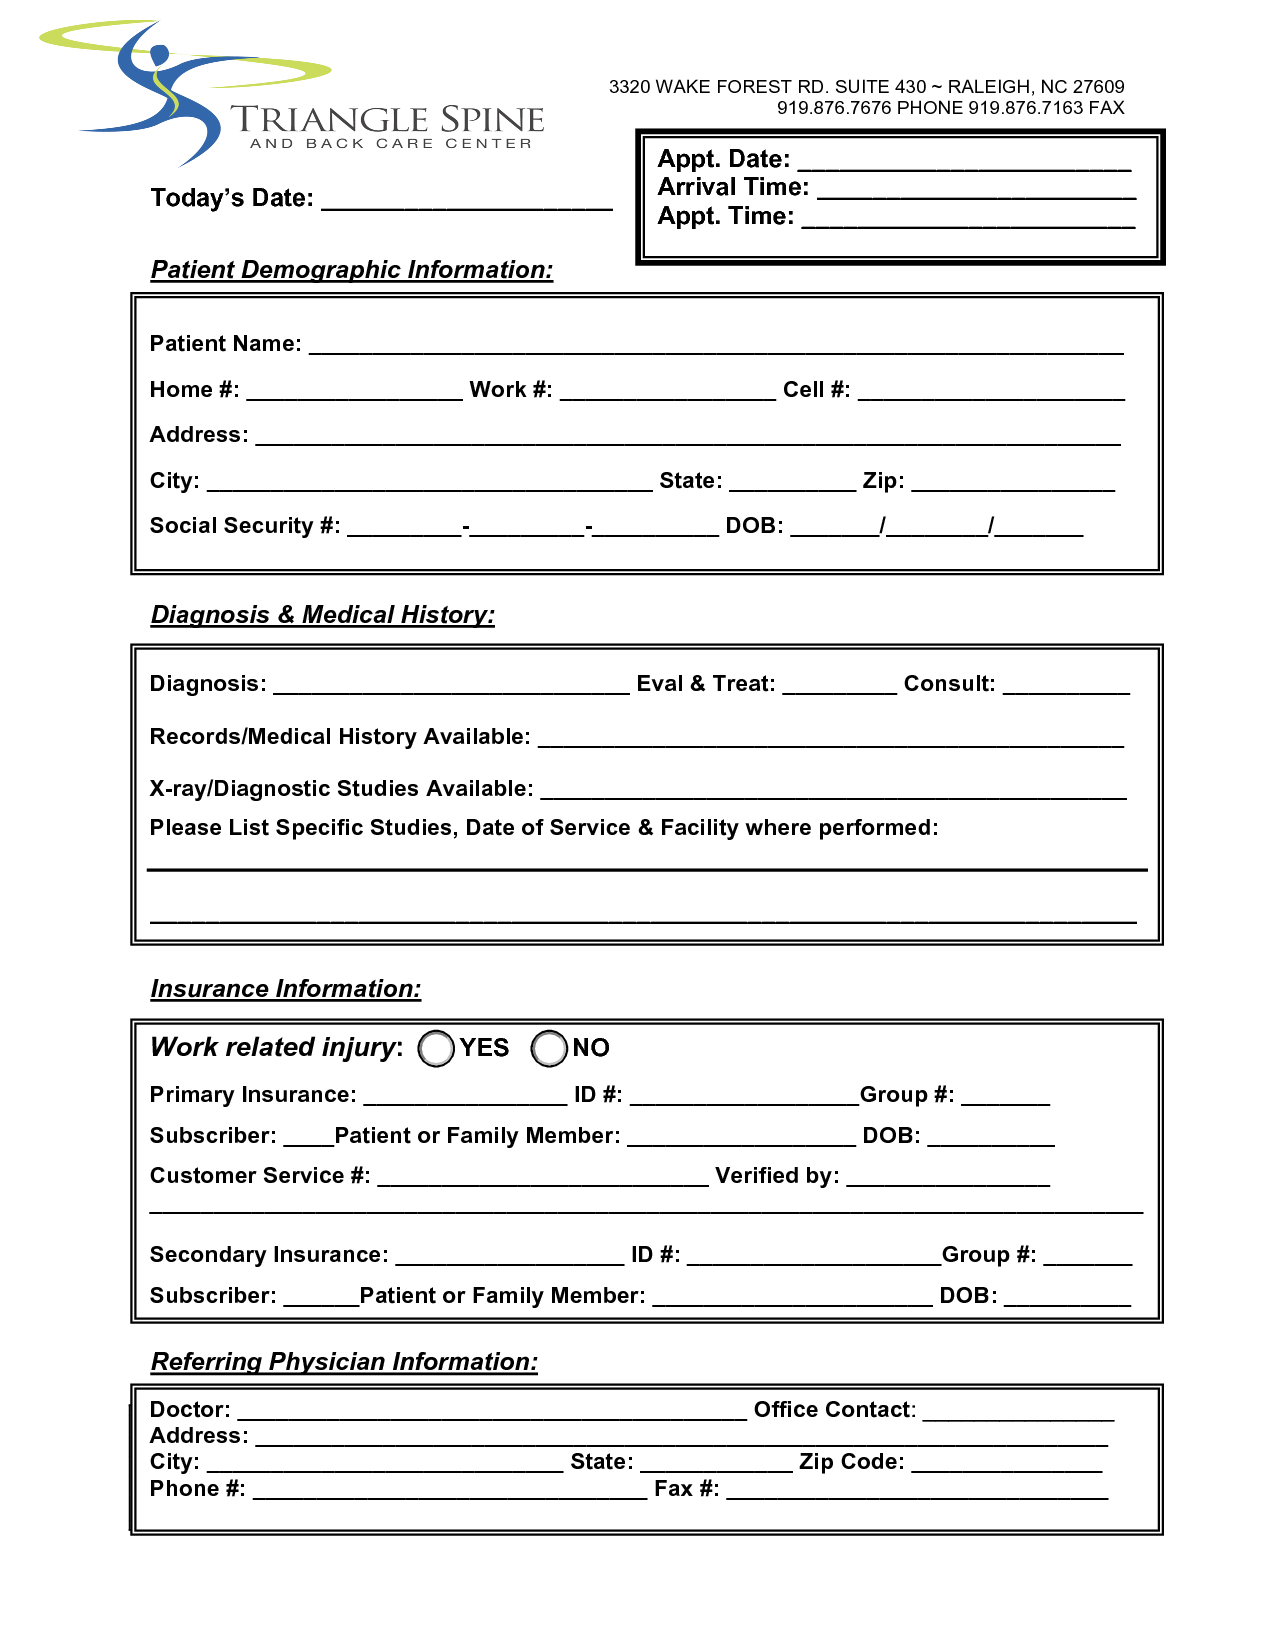 Patient Referral Form Template